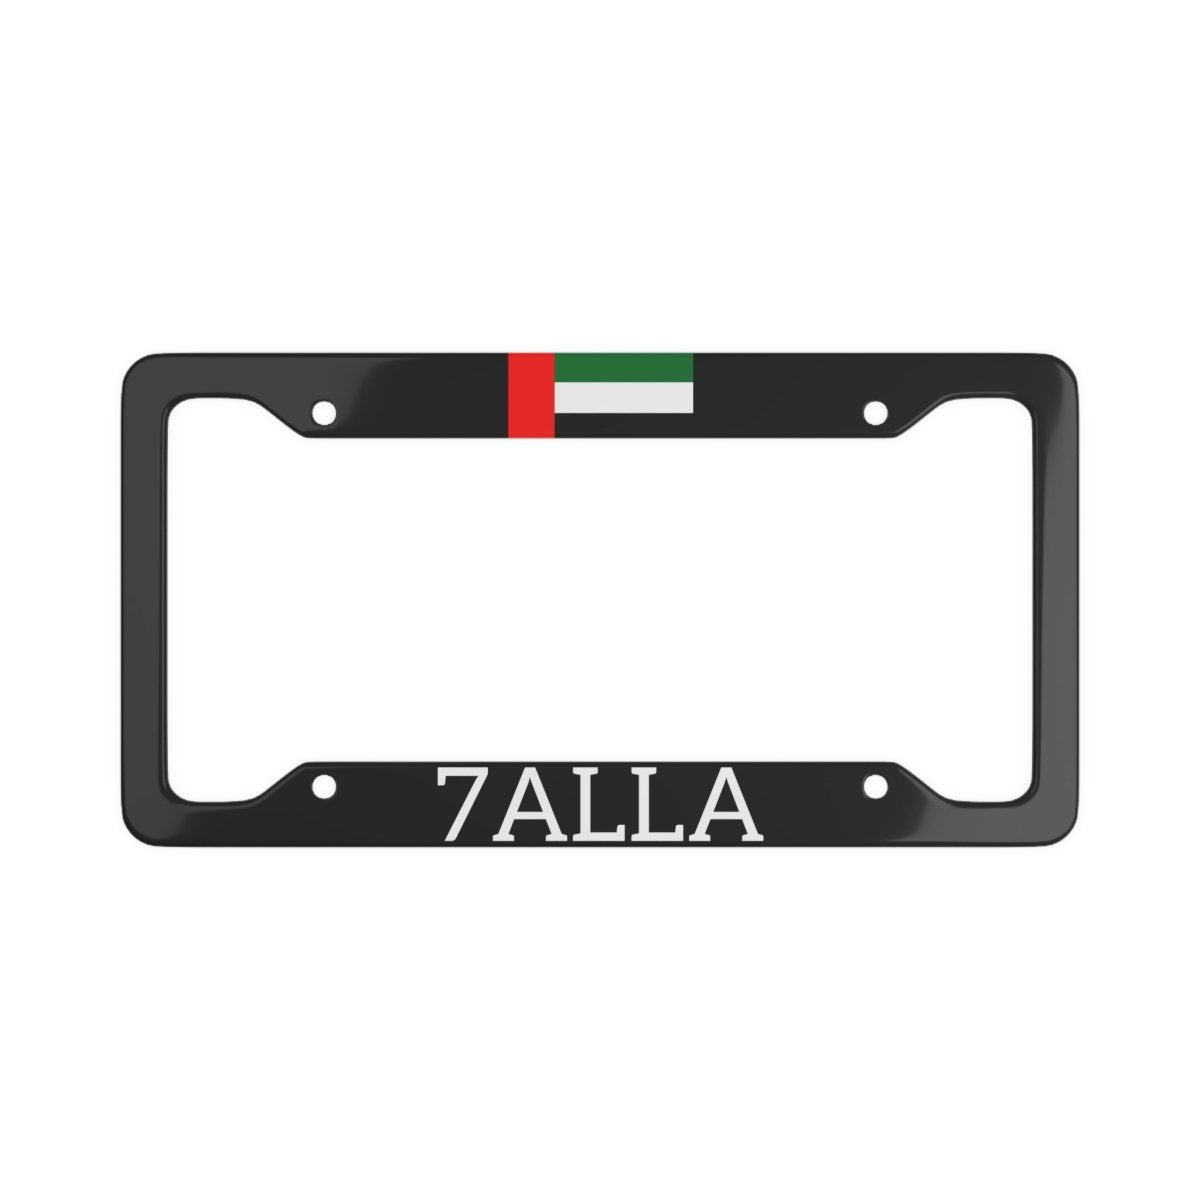 7ALLA with flag License Plate Frame - Cultics